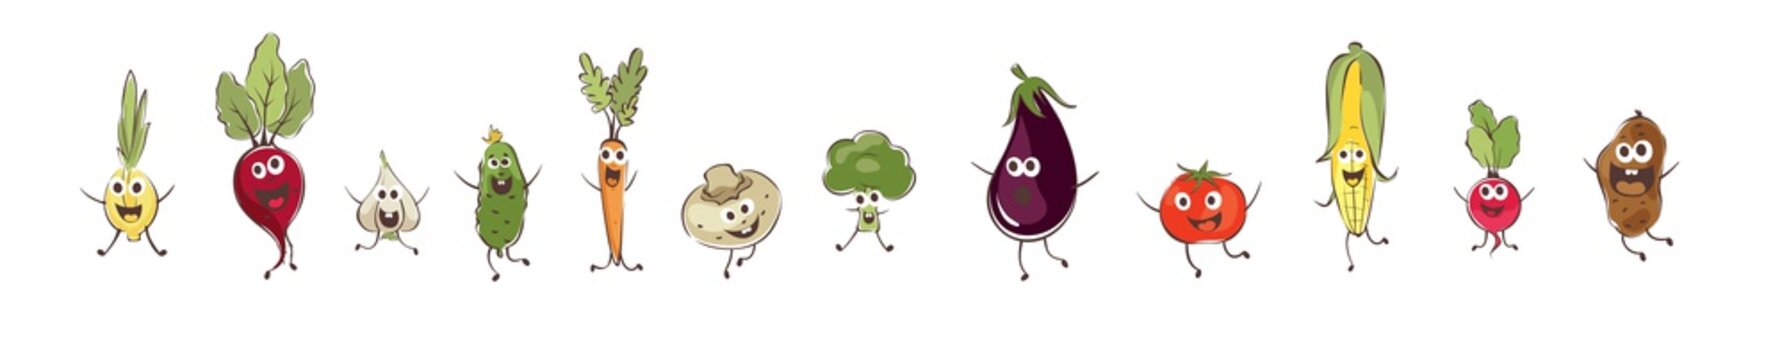 Funny cartoon vegetables. Set vector illustrations with different comic vegetables